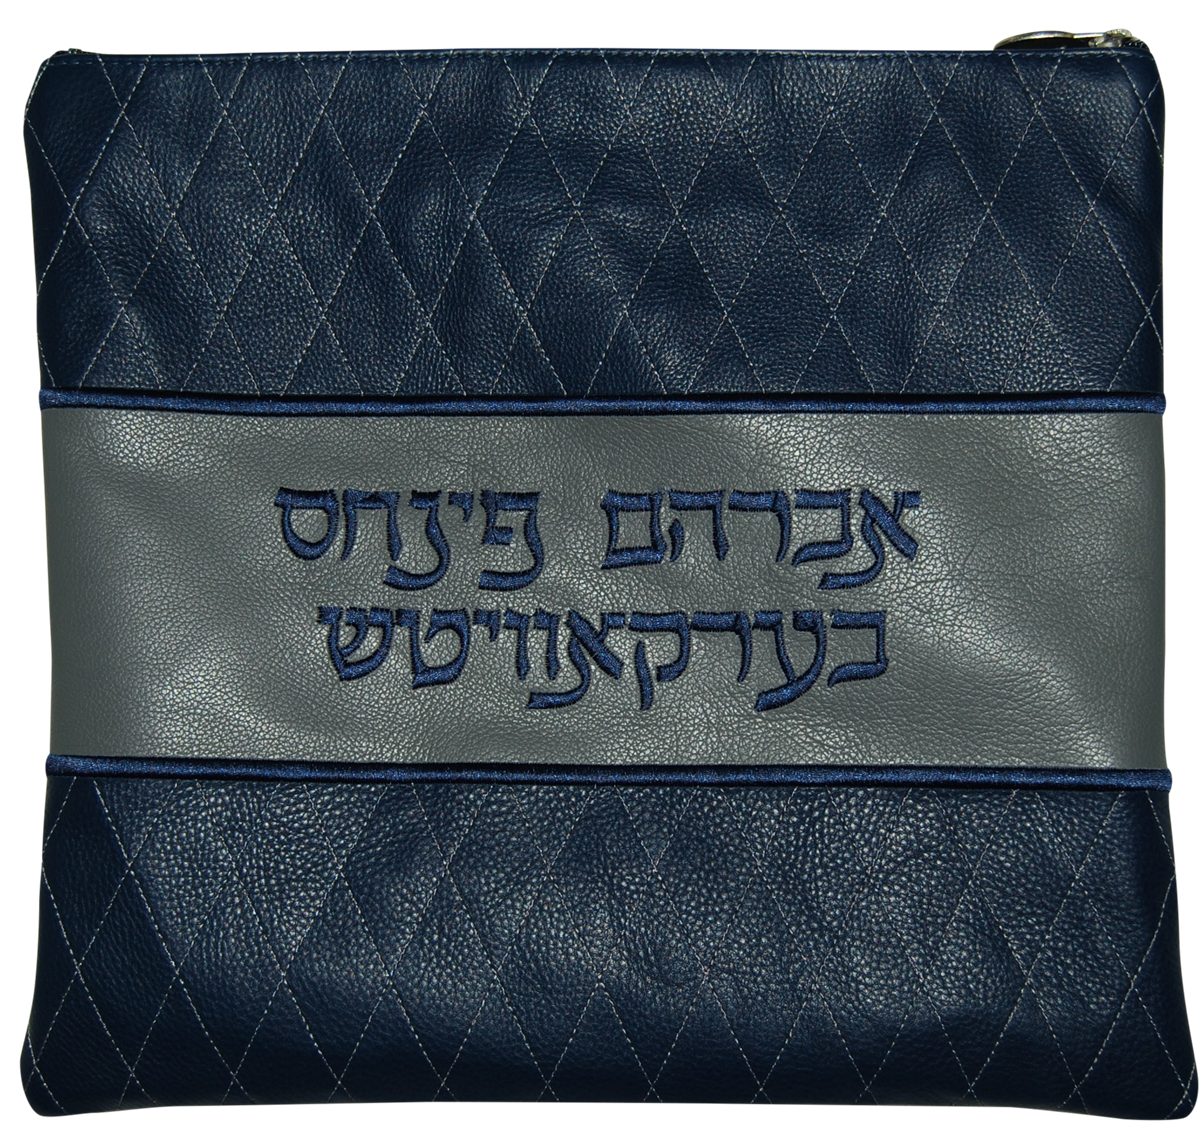 Cobalt embroidered diamond on cobalt leather with light grey center panel for the name.